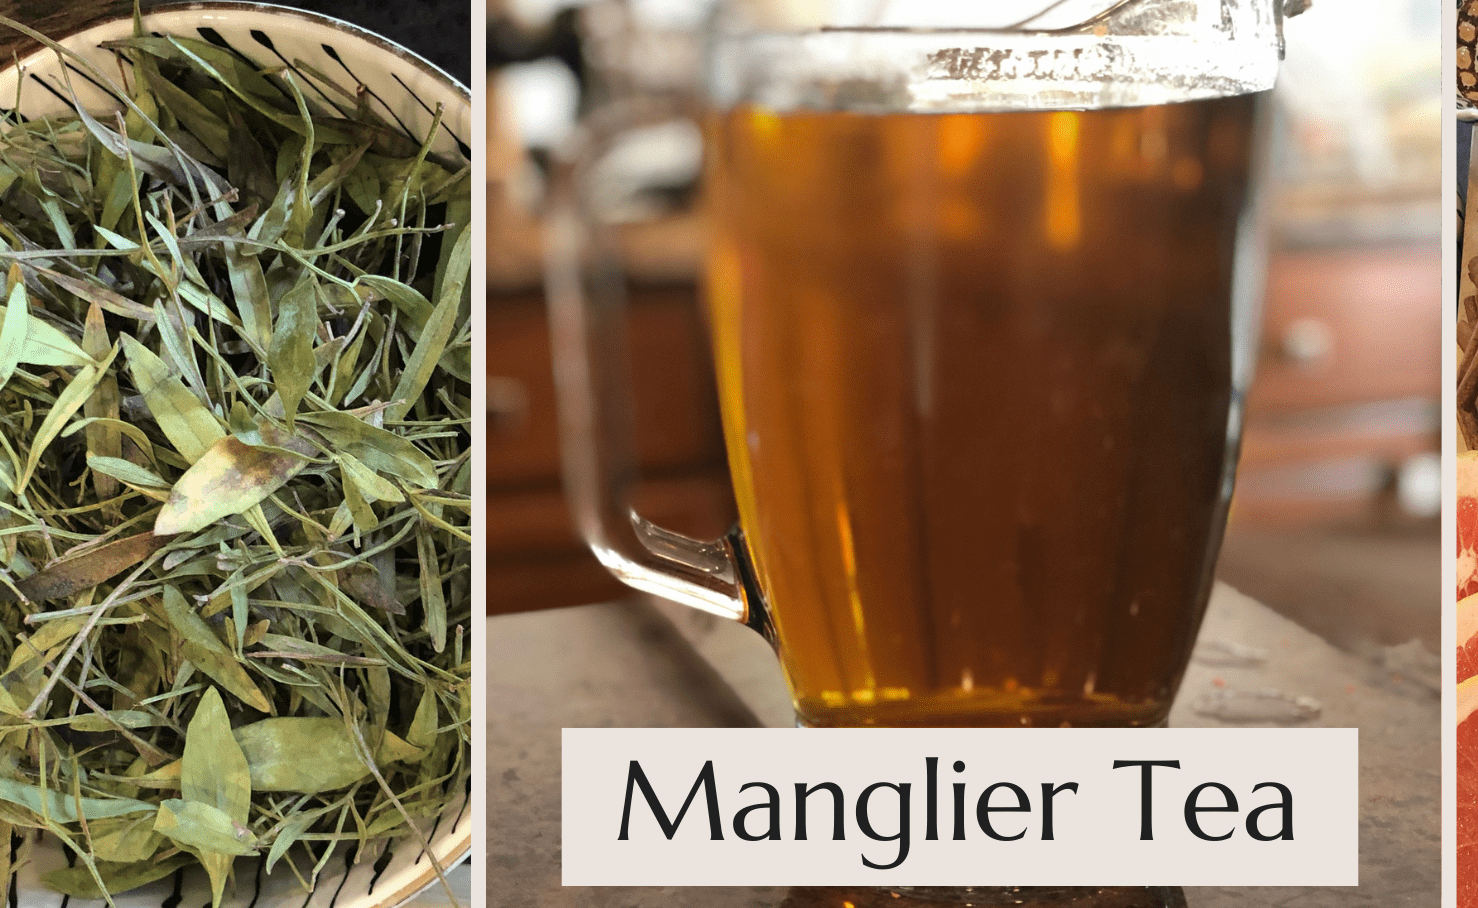 What is Manglier tea and how much to drink